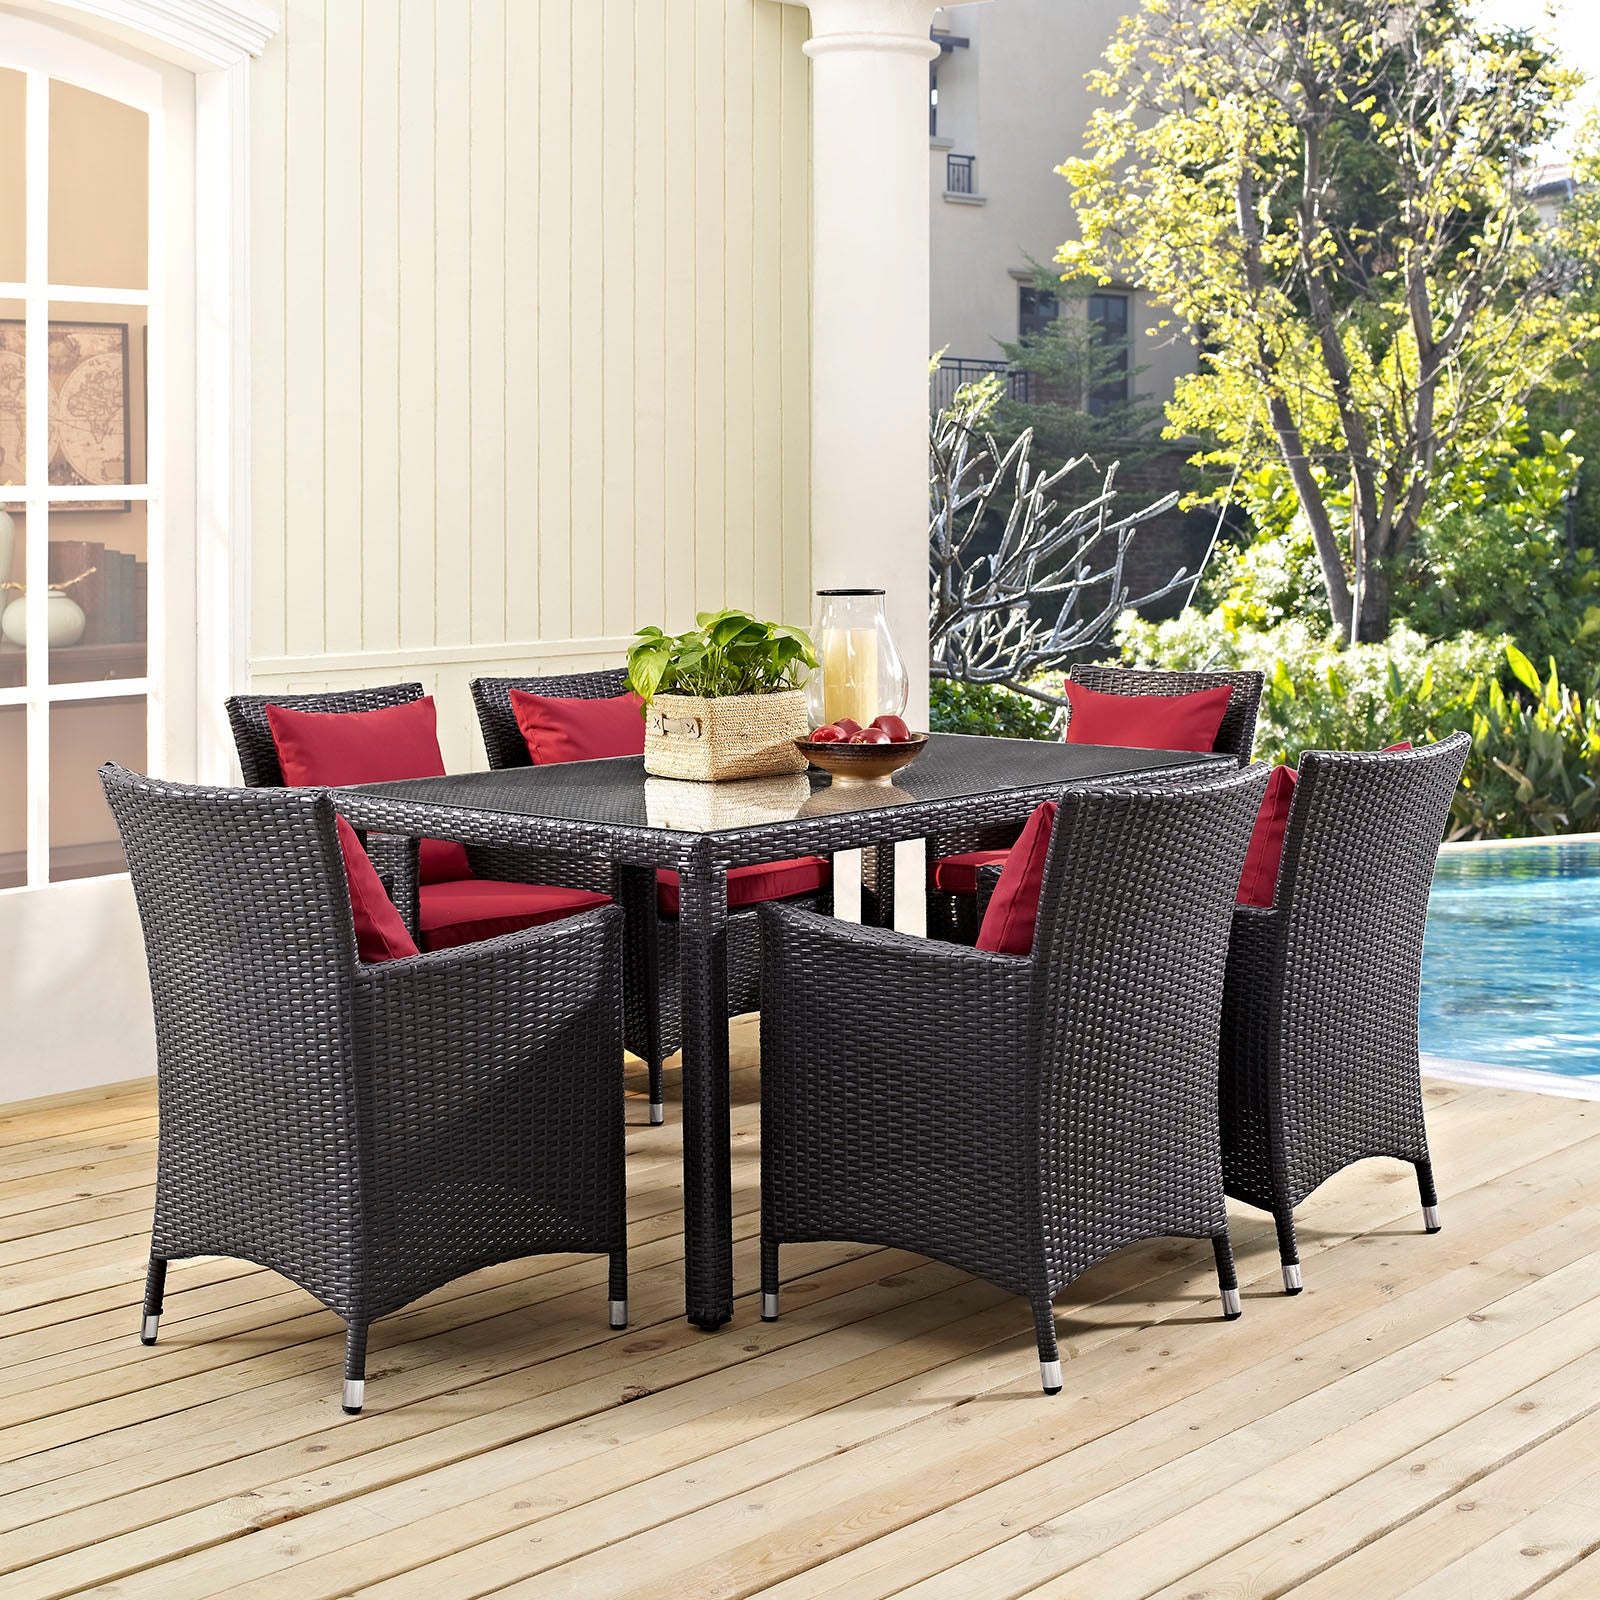 Modway Outdoor Dining Sets - Convene 7 Piece Outdoor Patio Dining Set Espresso Red 110"